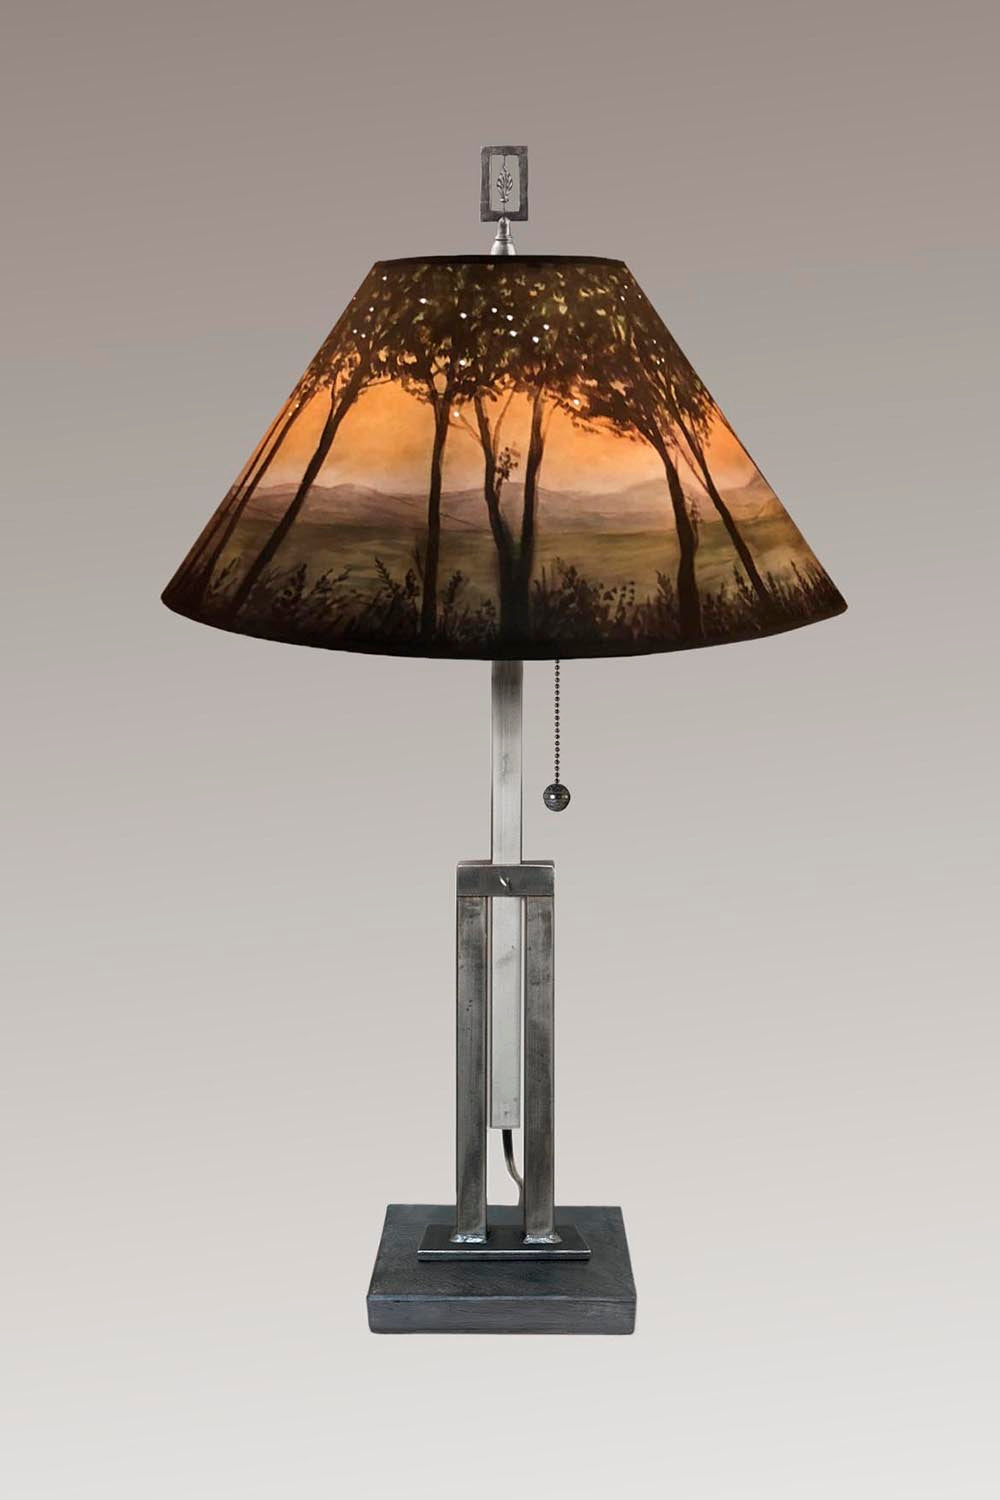 Janna Ugone & Co Table Lamps Adjustable-Height Steel Table Lamp with Large Conical Shade in Dawn